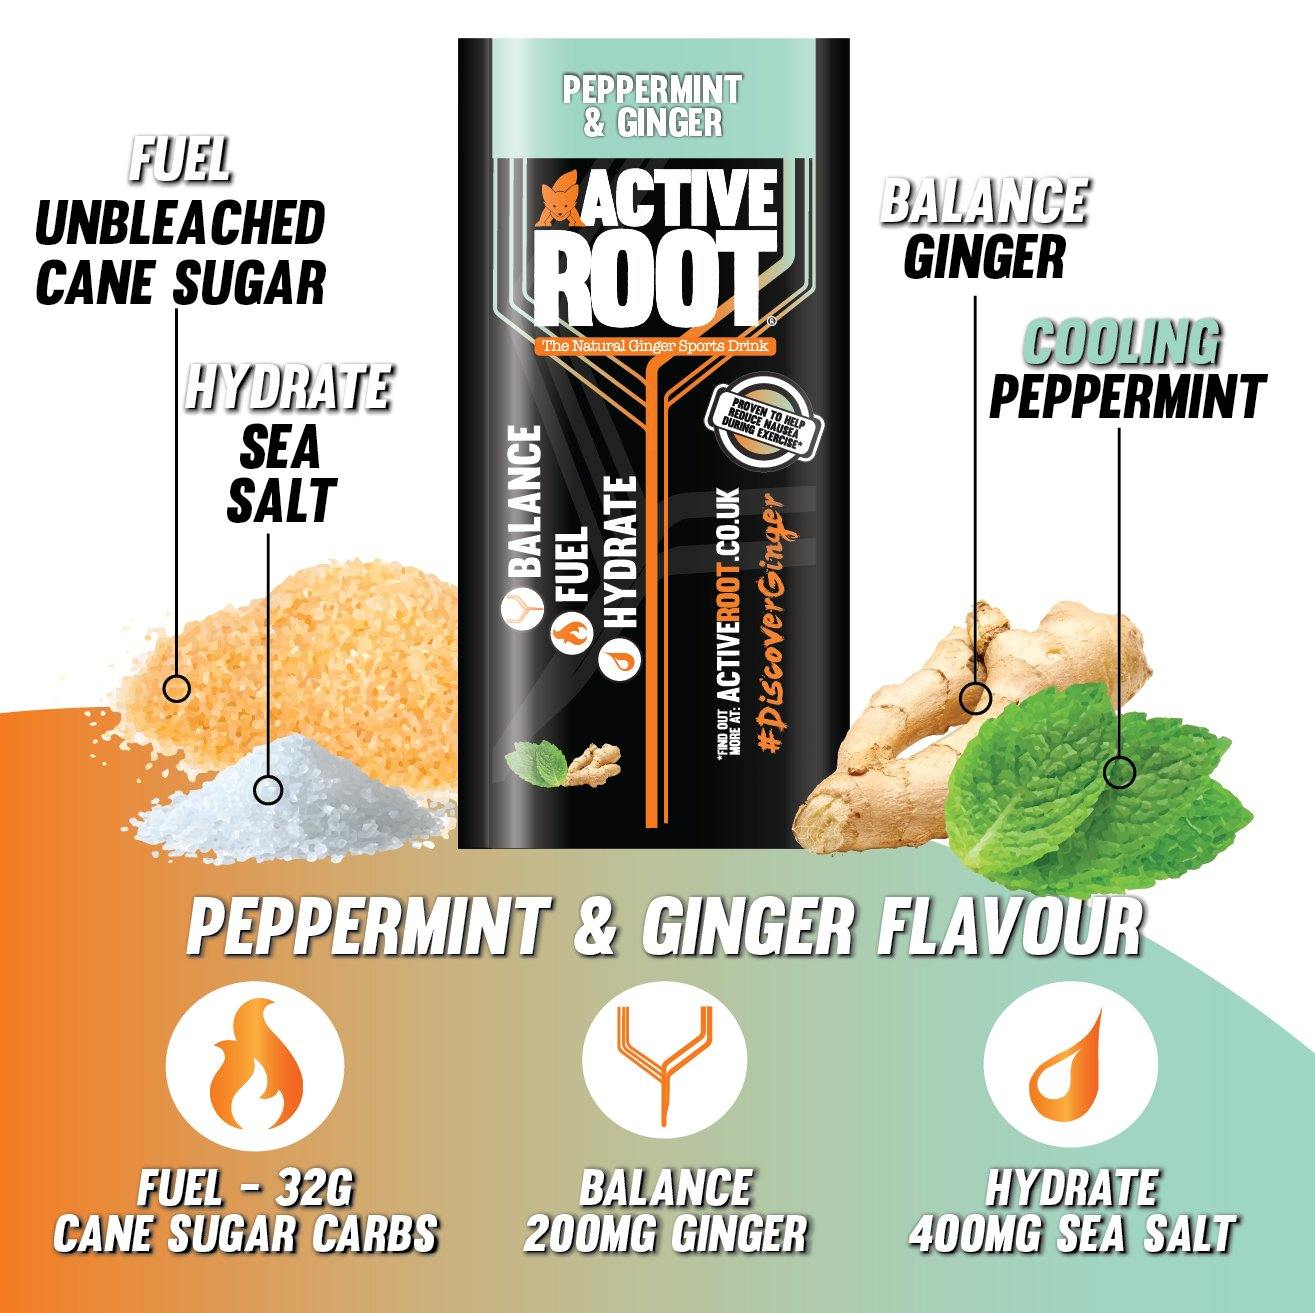 6 Sachet Pack - Peppermint & Ginger Flavour Sports Drink - Active Root